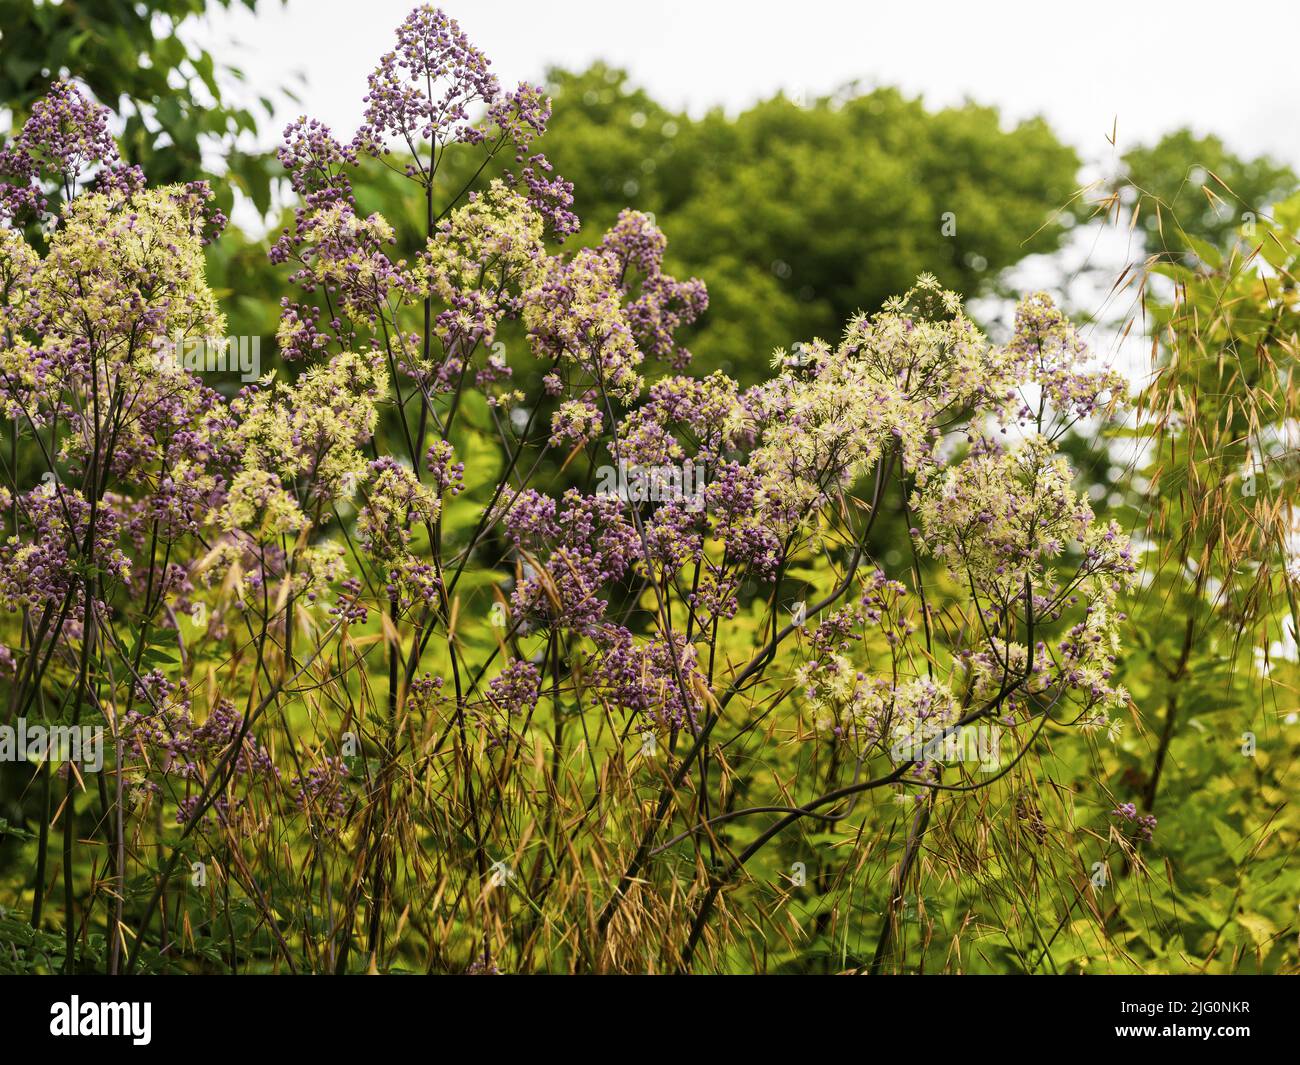 Purple buds and  yellow flowerrs of the tall, hardy hybrid perennial meadow rue, Thalictrum 'Elin' Stock Photo